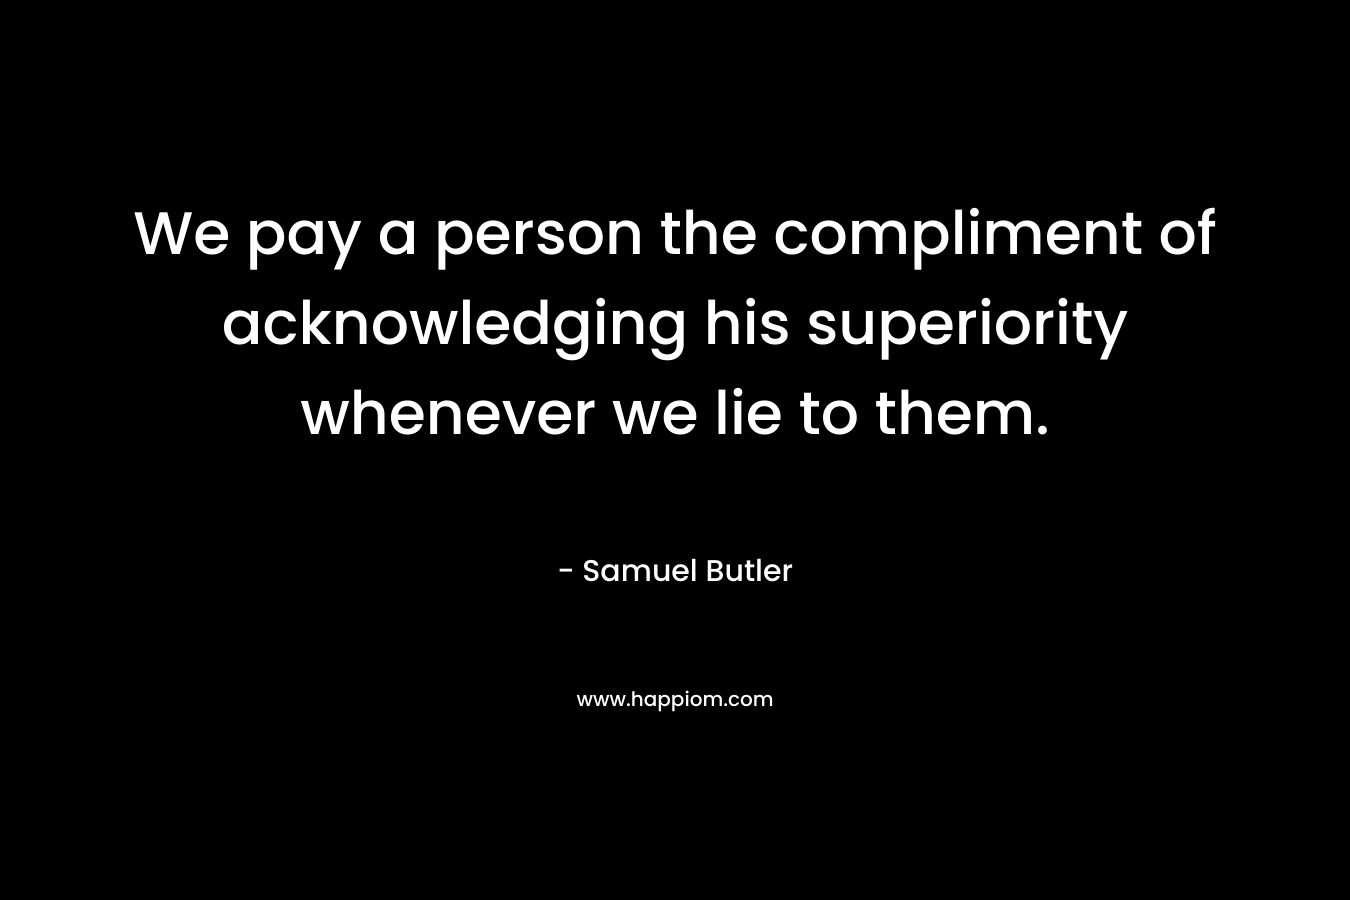 We pay a person the compliment of acknowledging his superiority whenever we lie to them. – Samuel Butler